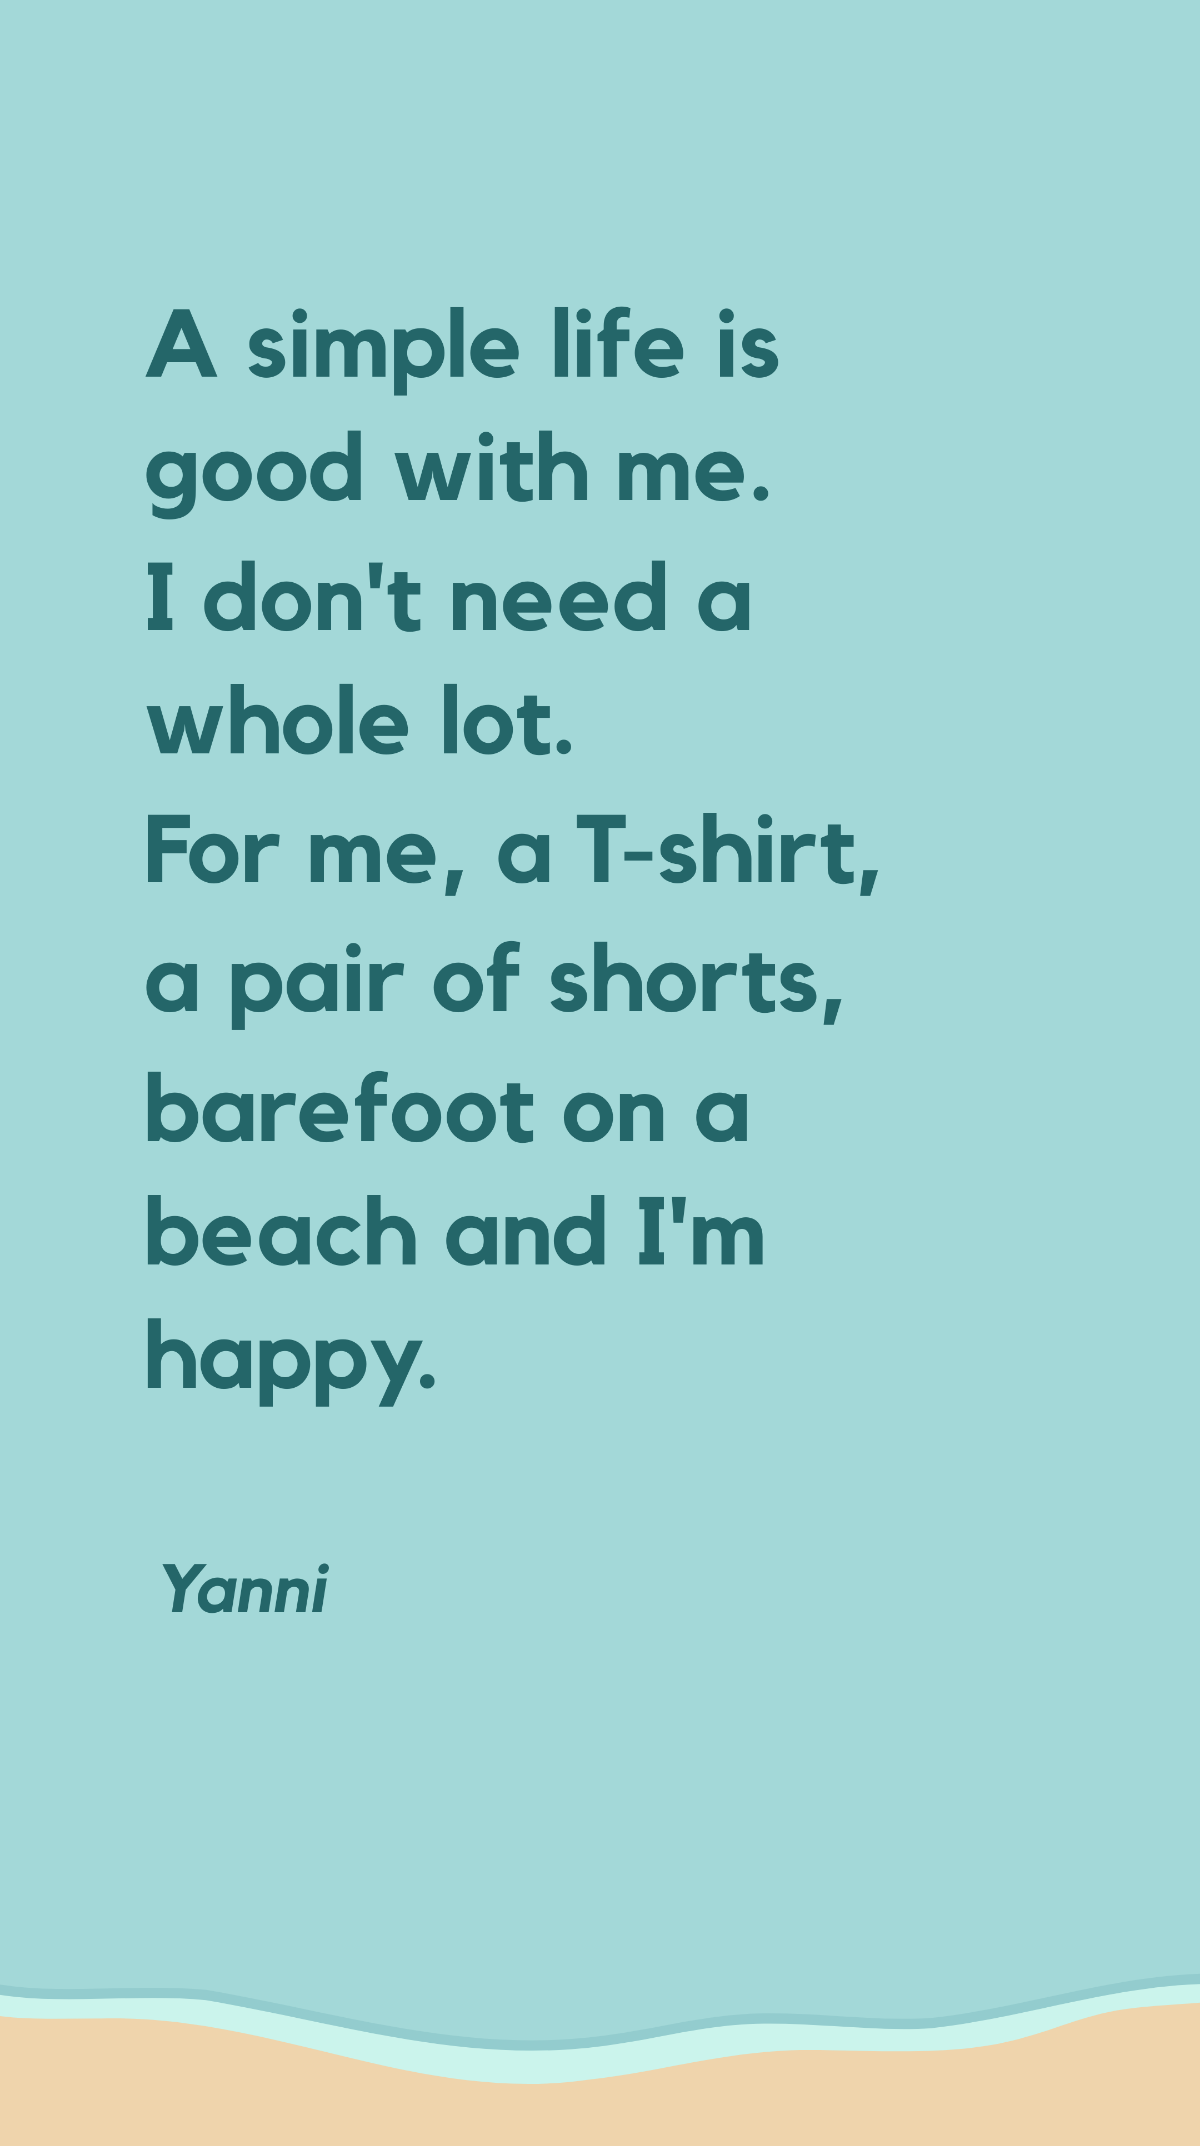 Free Yanni - A simple life is good with me. I don't need a whole lot. For me, a T-shirt, a pair of shorts, barefoot on a beach and I'm happy. Template